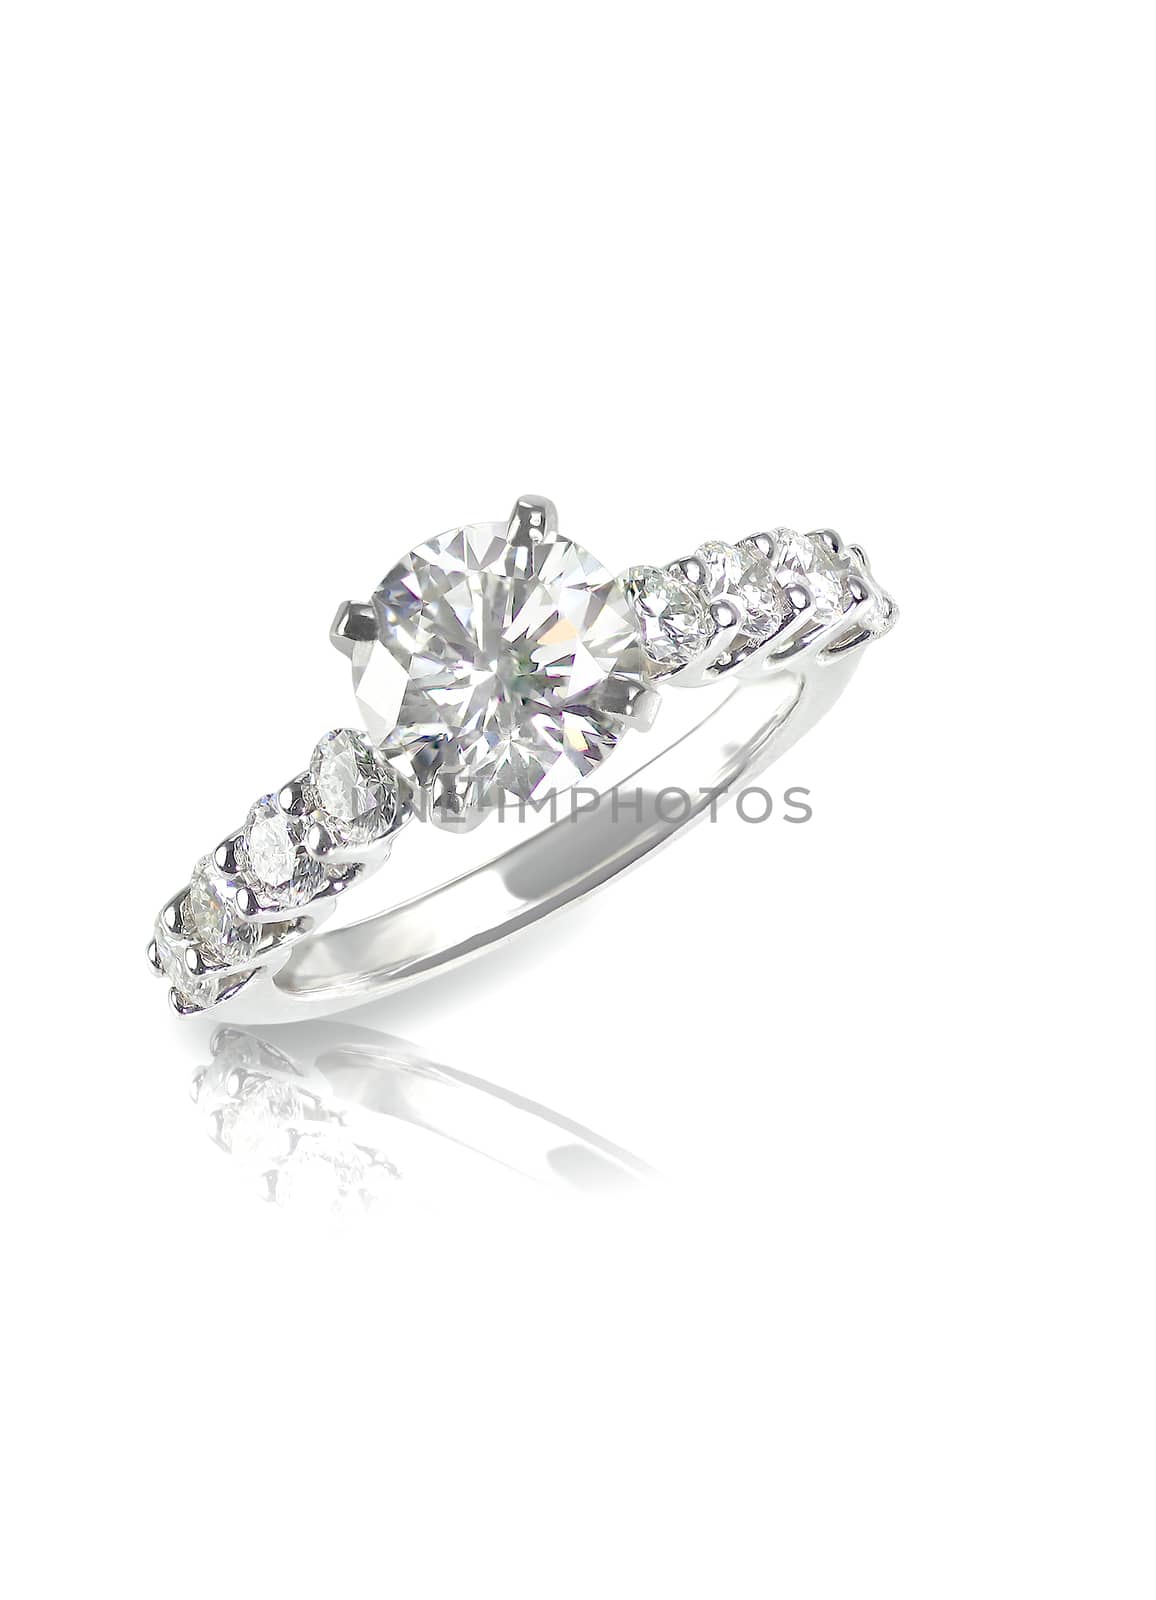 Beautiful diamond wedding ring set with multiple diamonds within a gold or platinum setting